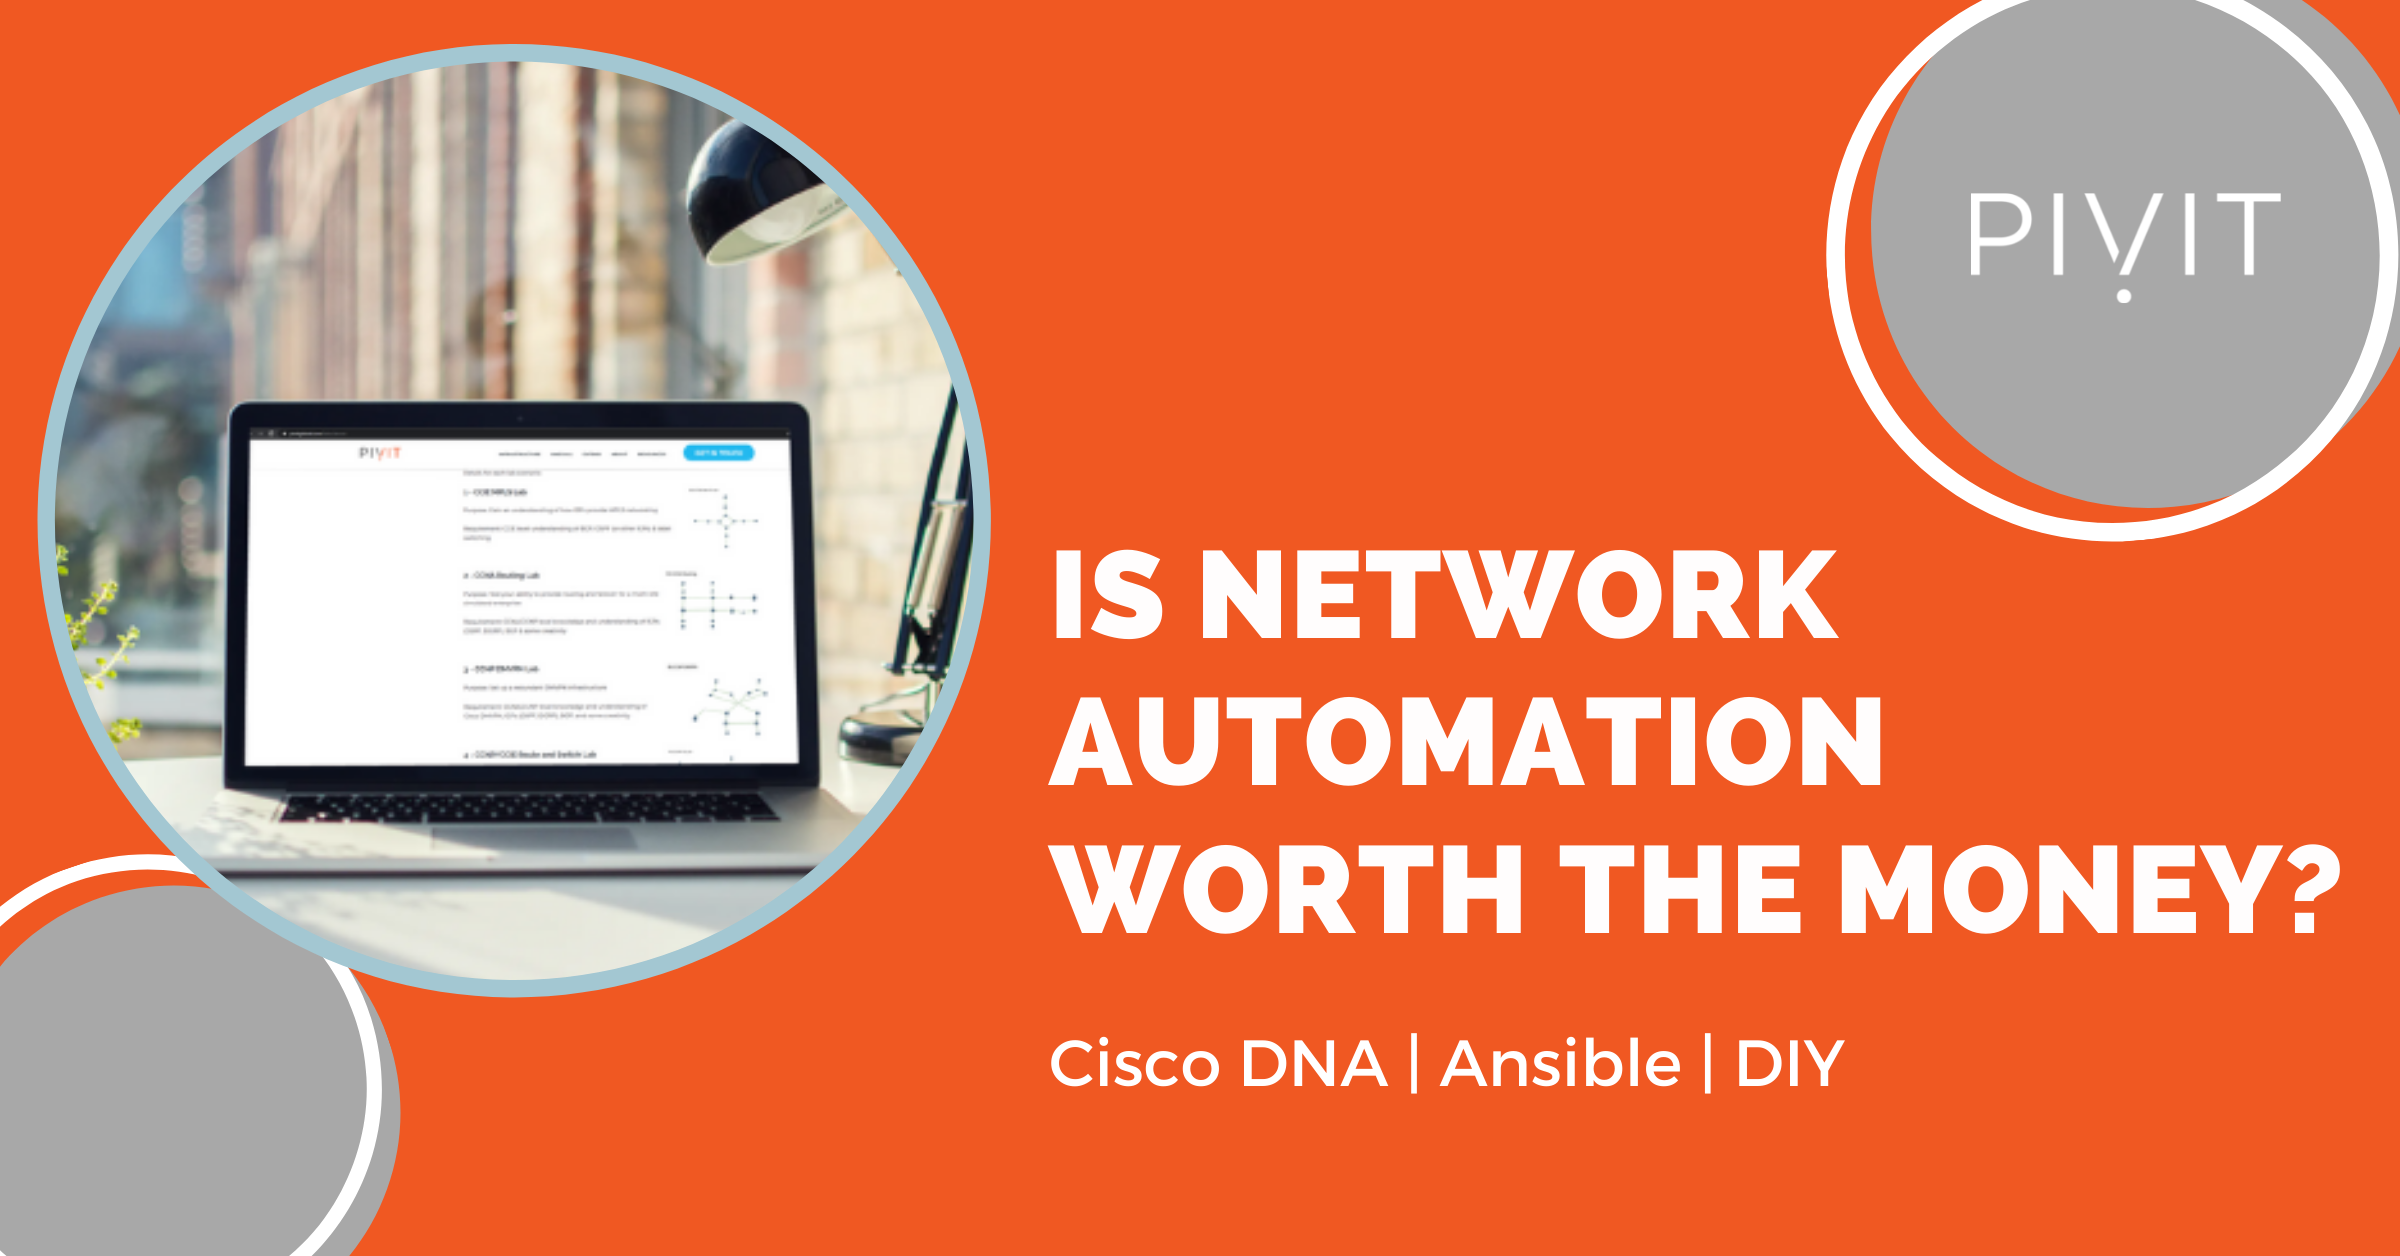 Is Network Automation Worth the Money - Cisco DNA, Ansible, and DIY